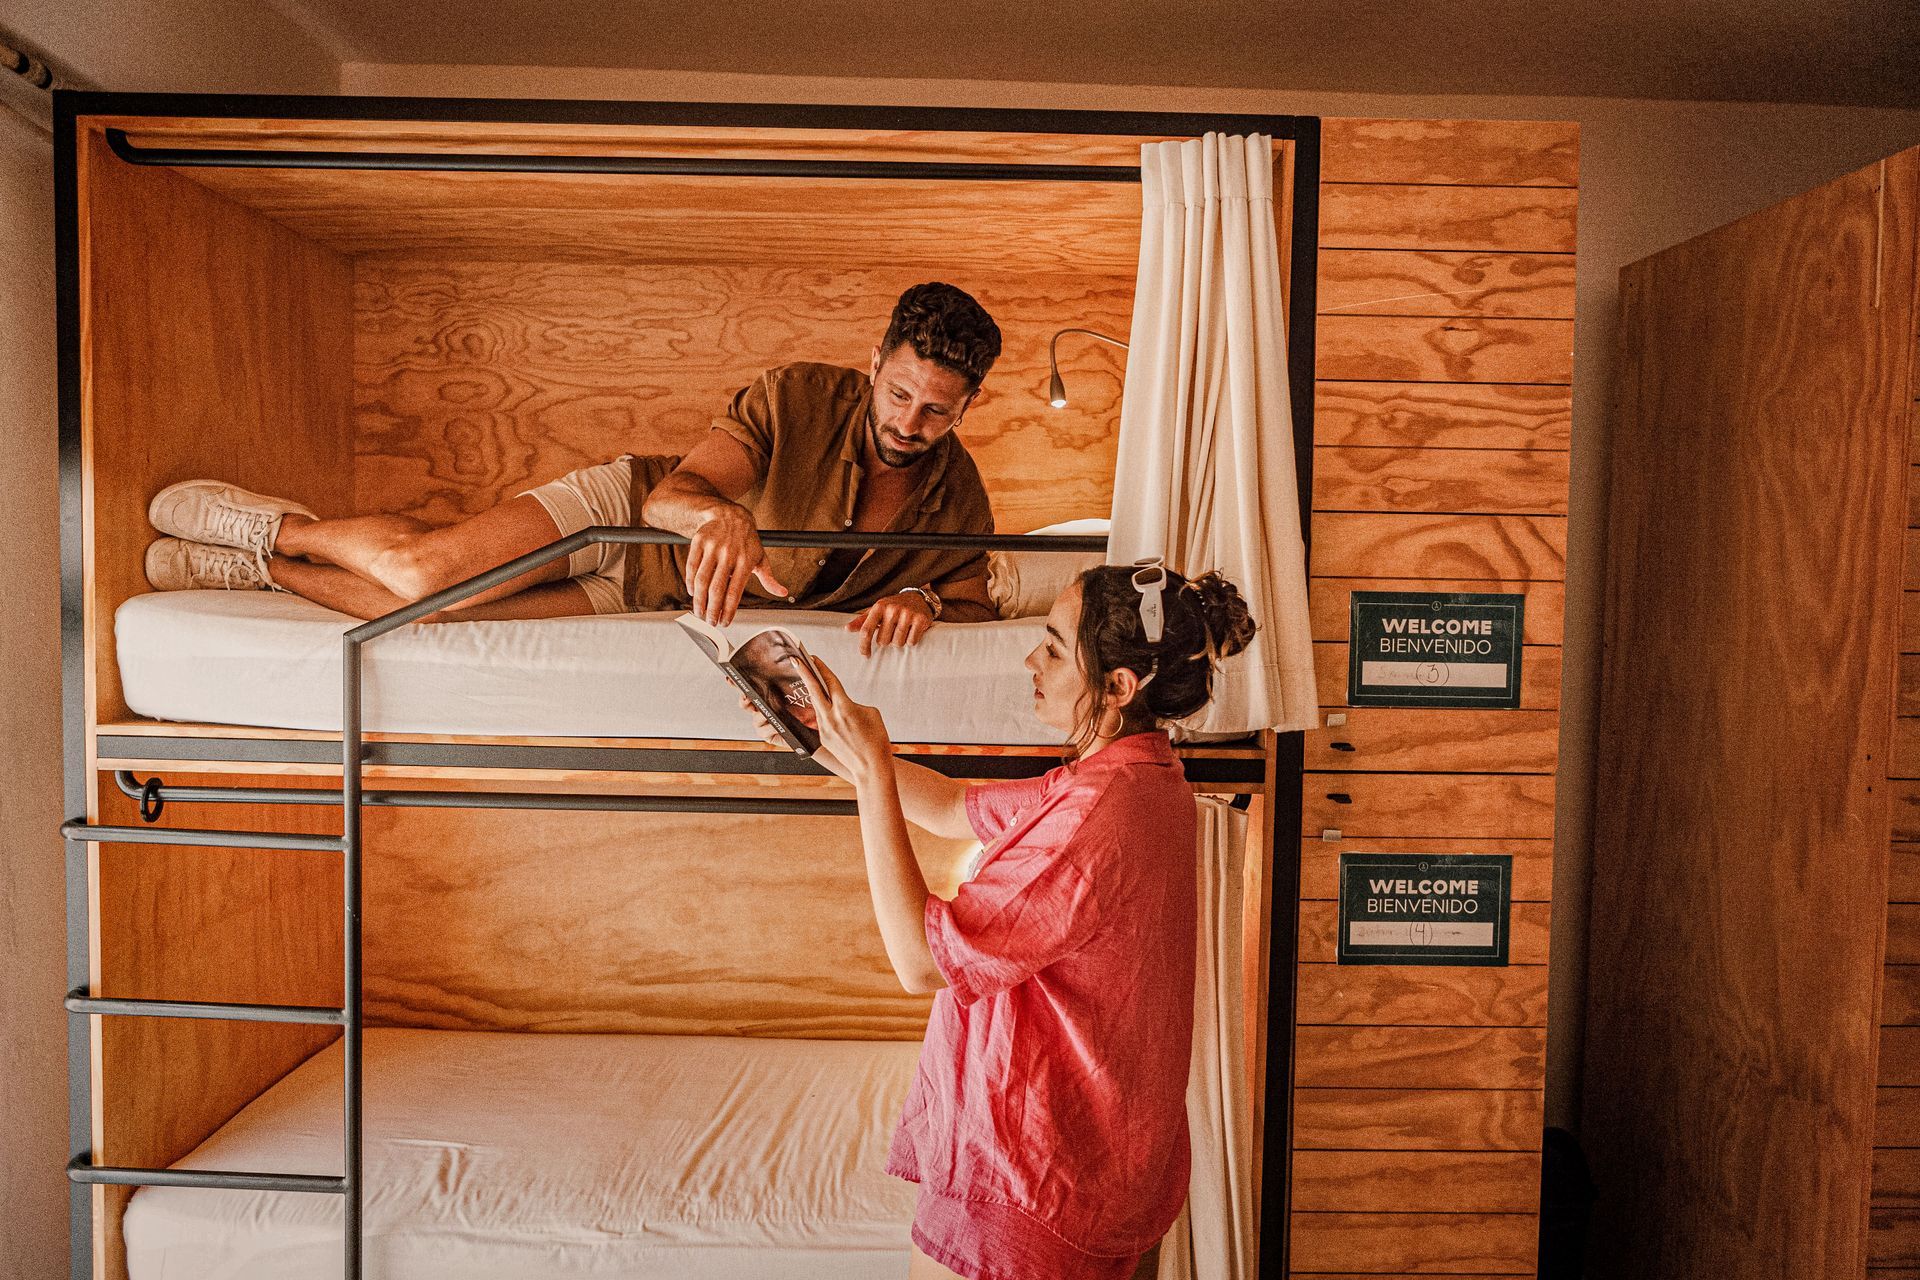 A man and a woman are laying on bunk beds in a room.